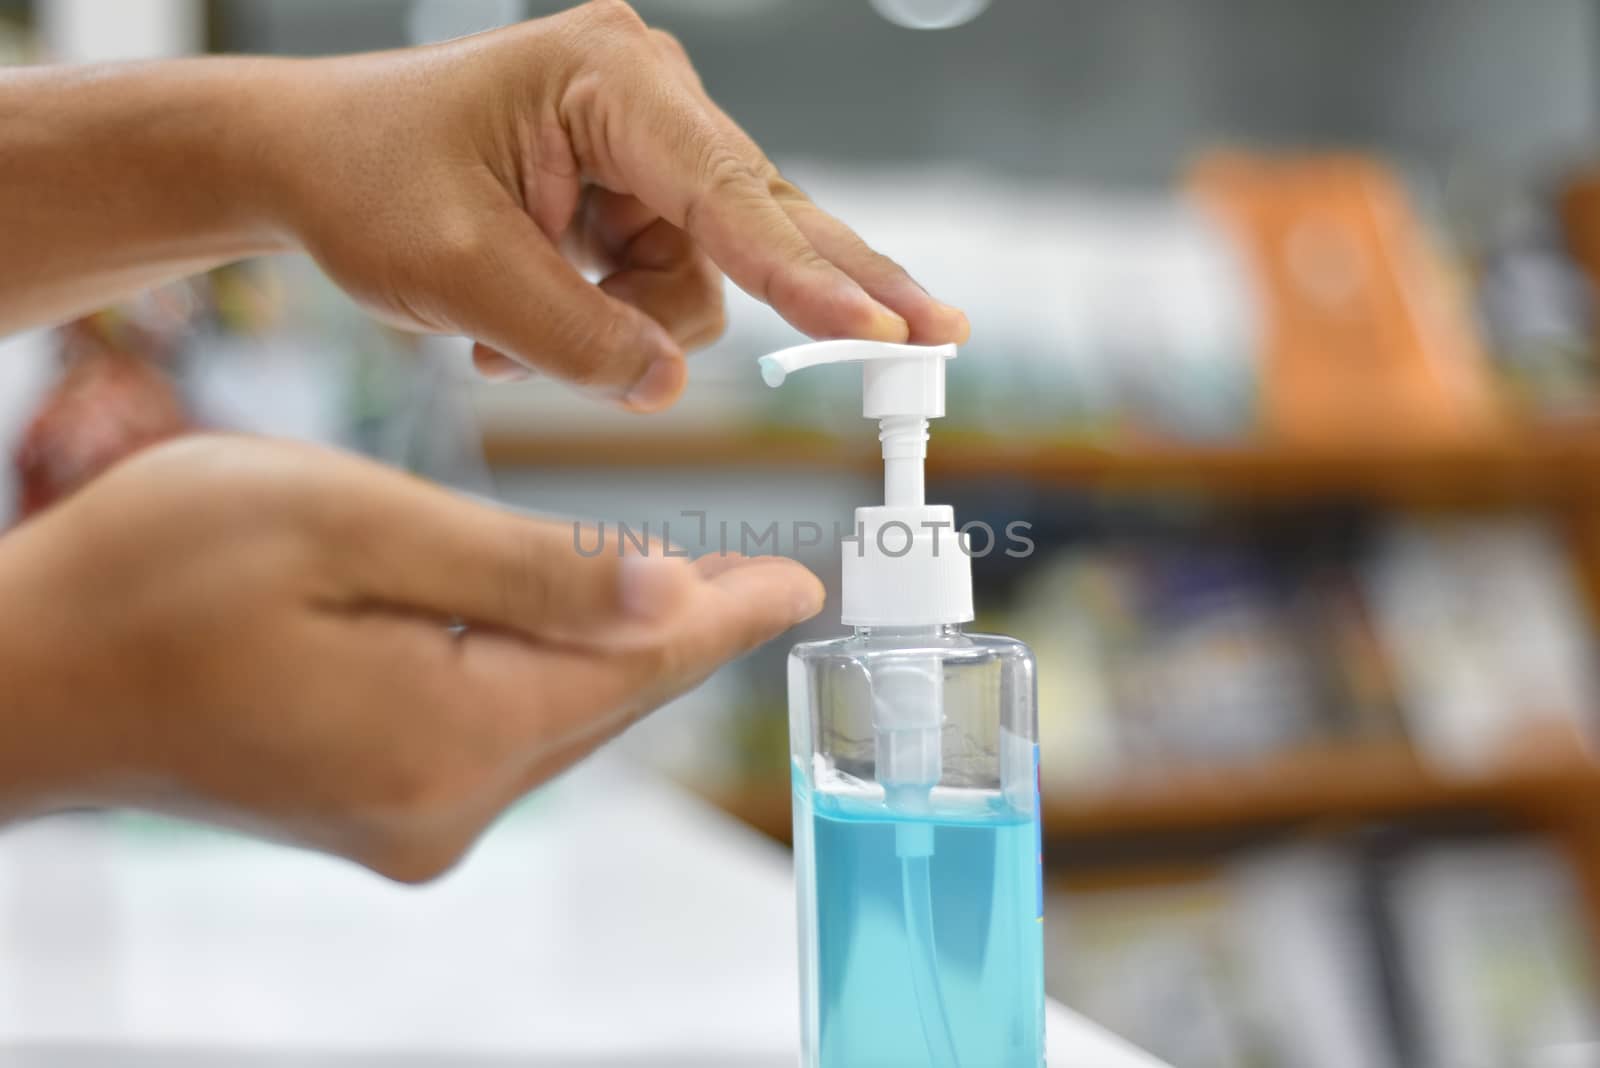 concept using alcohol gel clean wash hand sanitizer anti virus bacteria dirty skin care hand sanitizer for hygiene corona virus protection and avoid infections covid-19 virus. Soft Selected focus